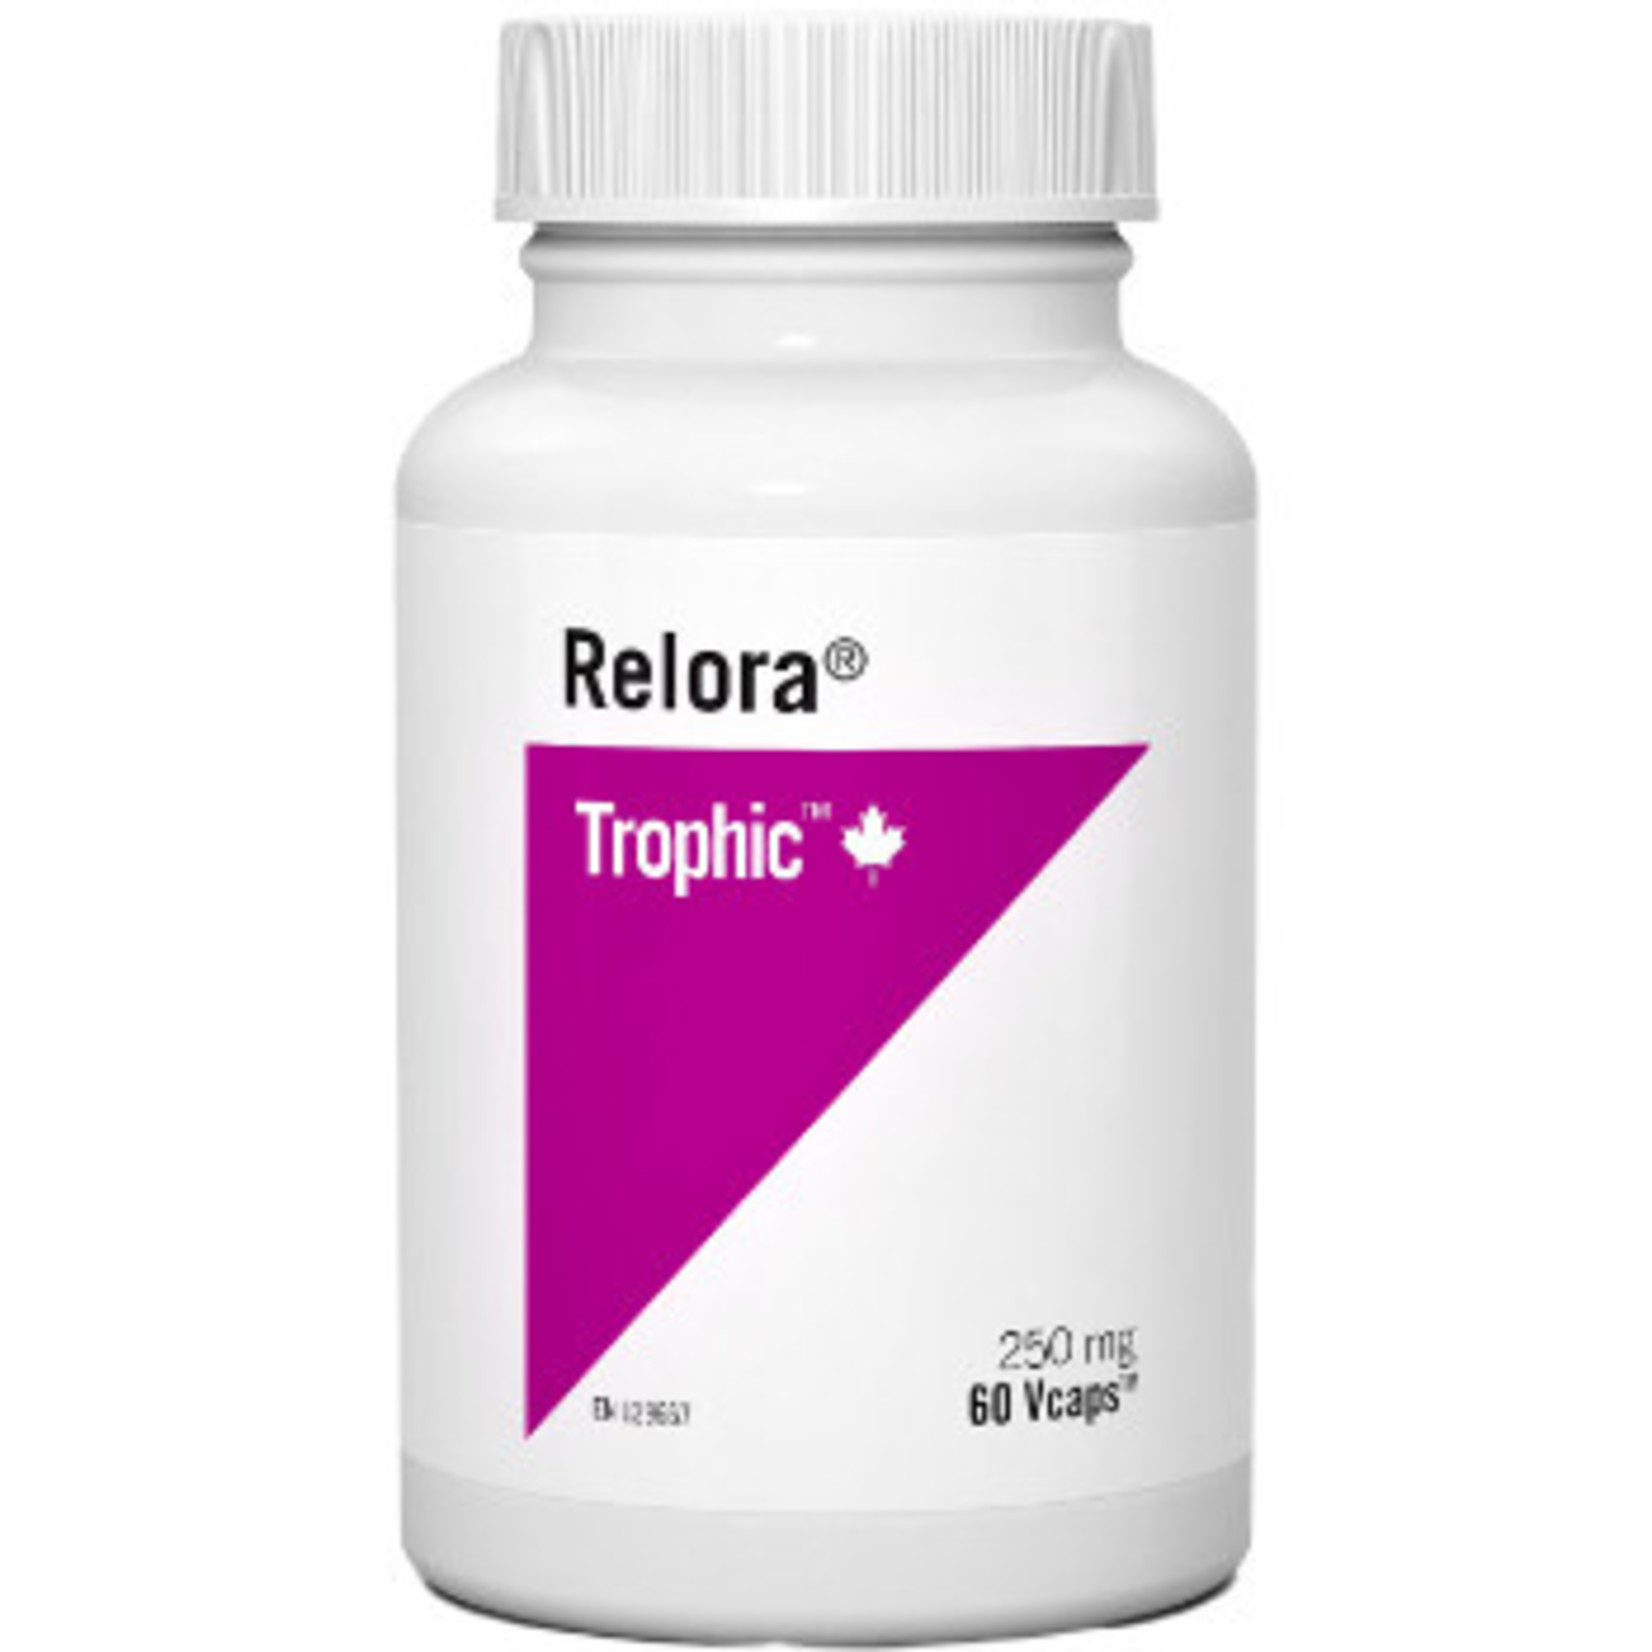 TROPHIC TROPHIC RELORA 250MG 60 VCAPS